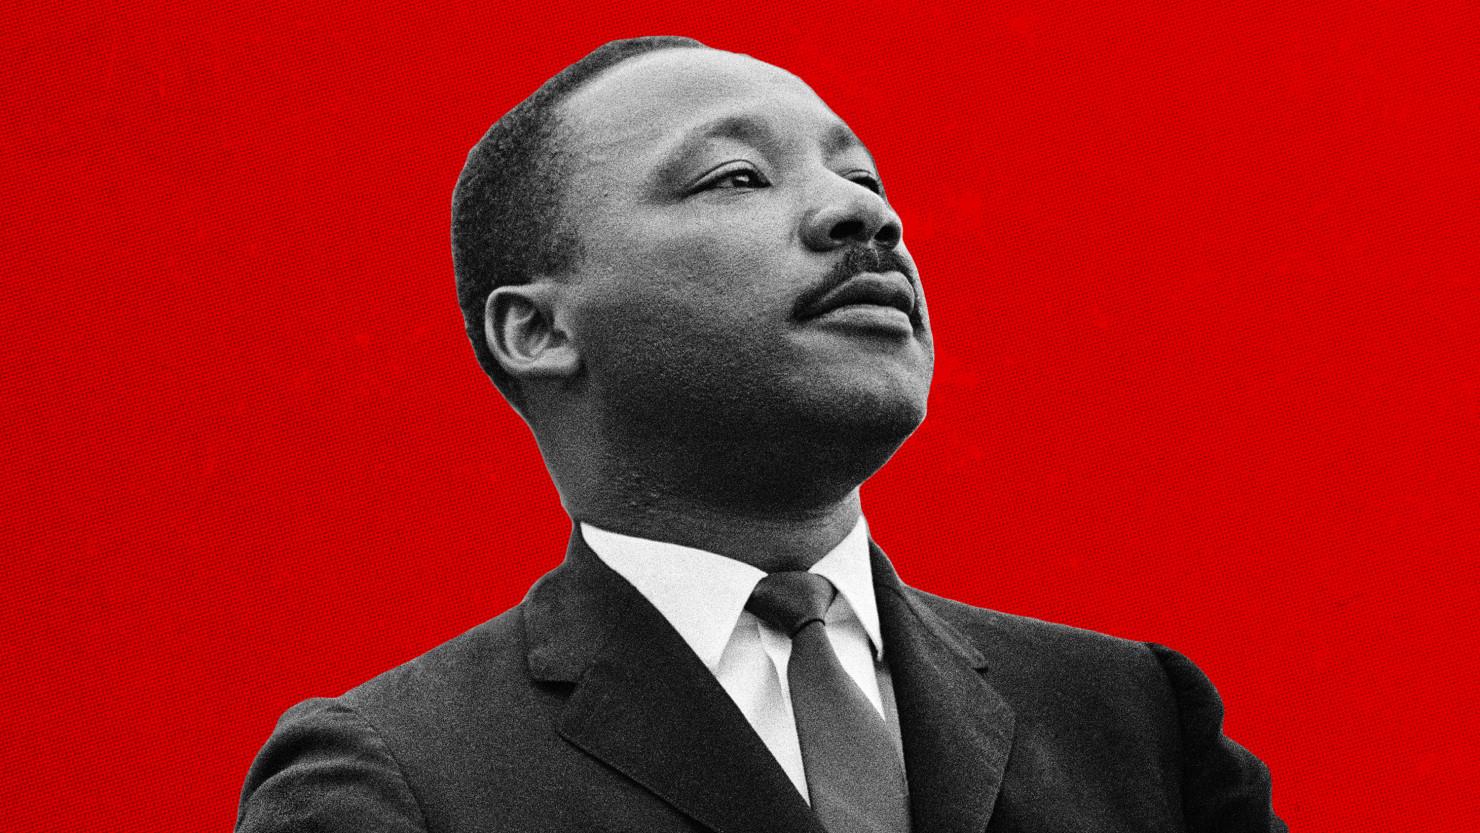 The Time Is Now for the “Radical Revolution of Values” That MLK Called For